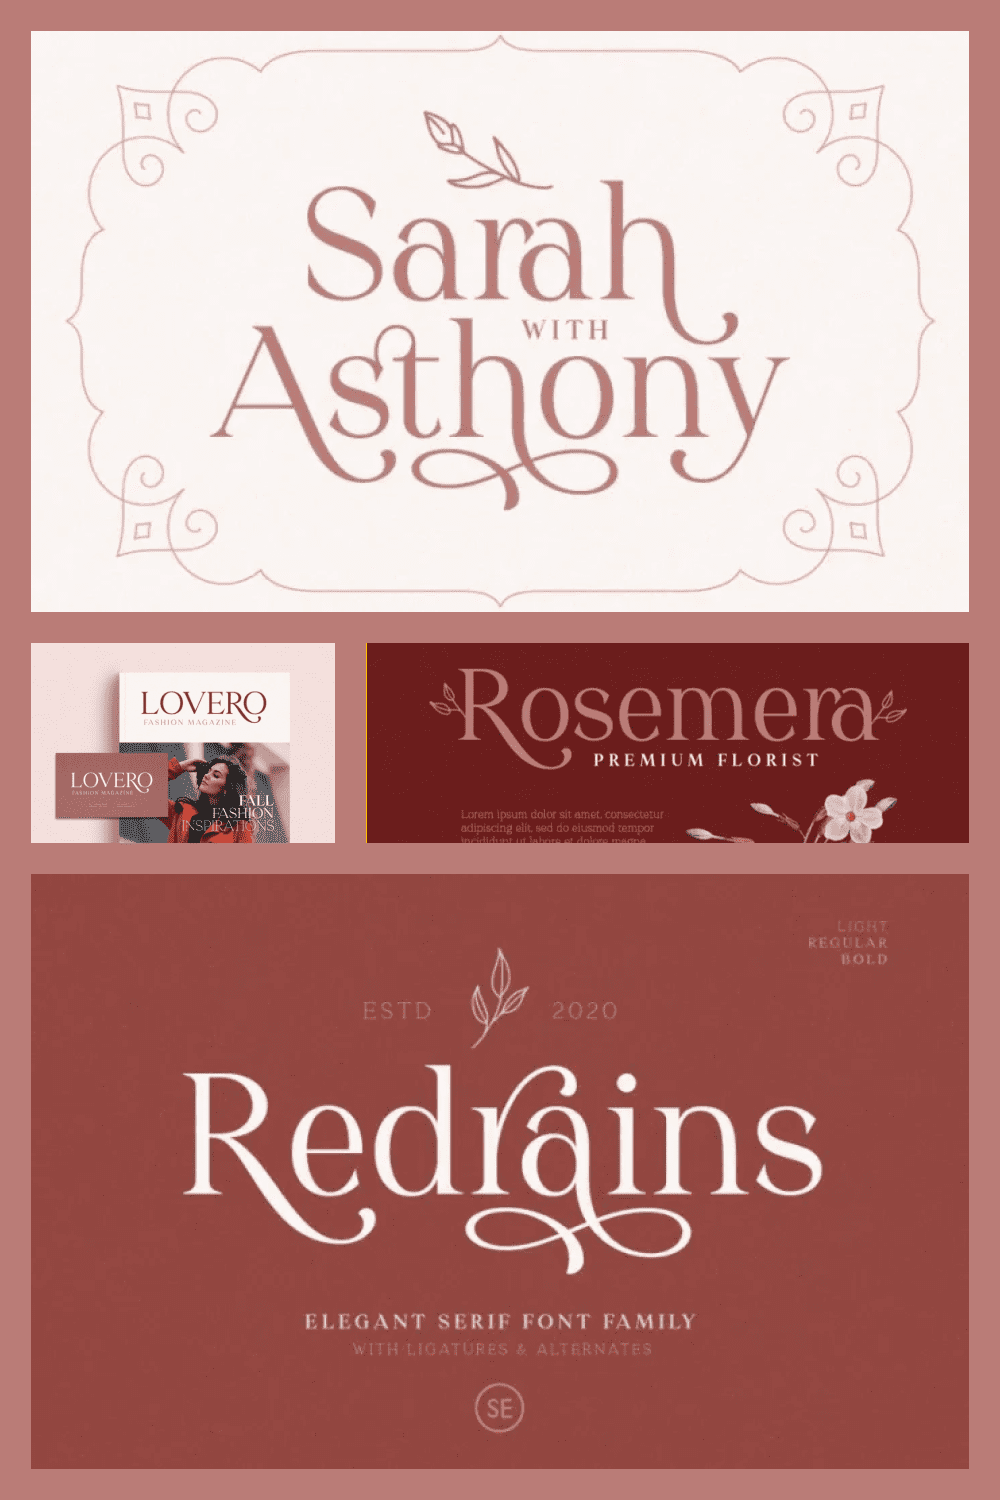 This is a vintage modern style serif font with 3 weight style and a bunch of alternates for each characters.